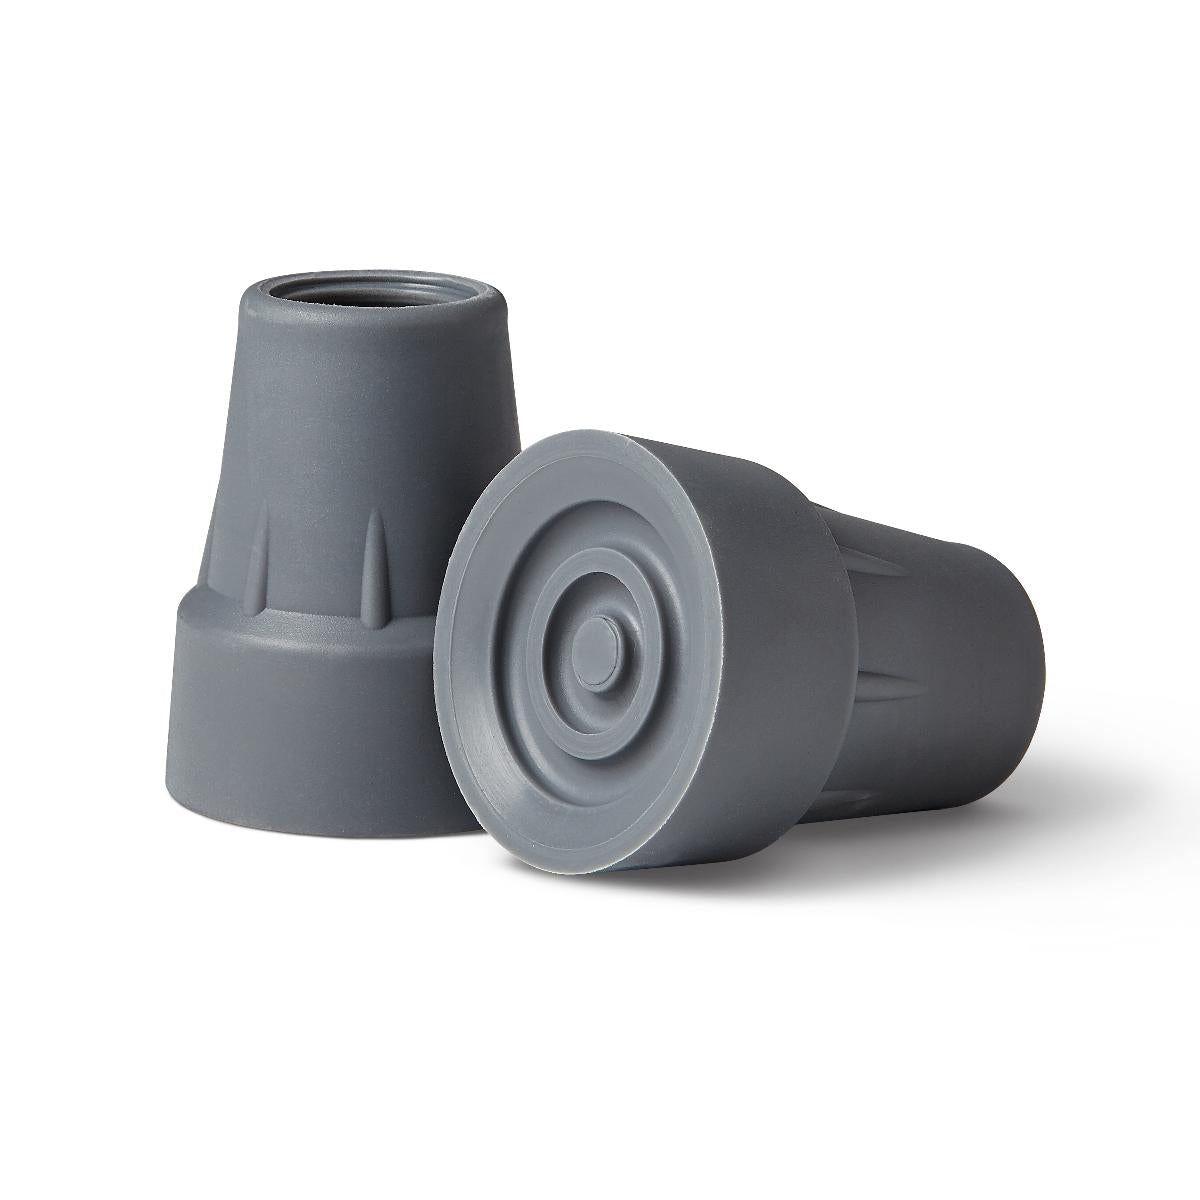 Medline Crutch Replacement Tips, Gray (MDS80266RW)